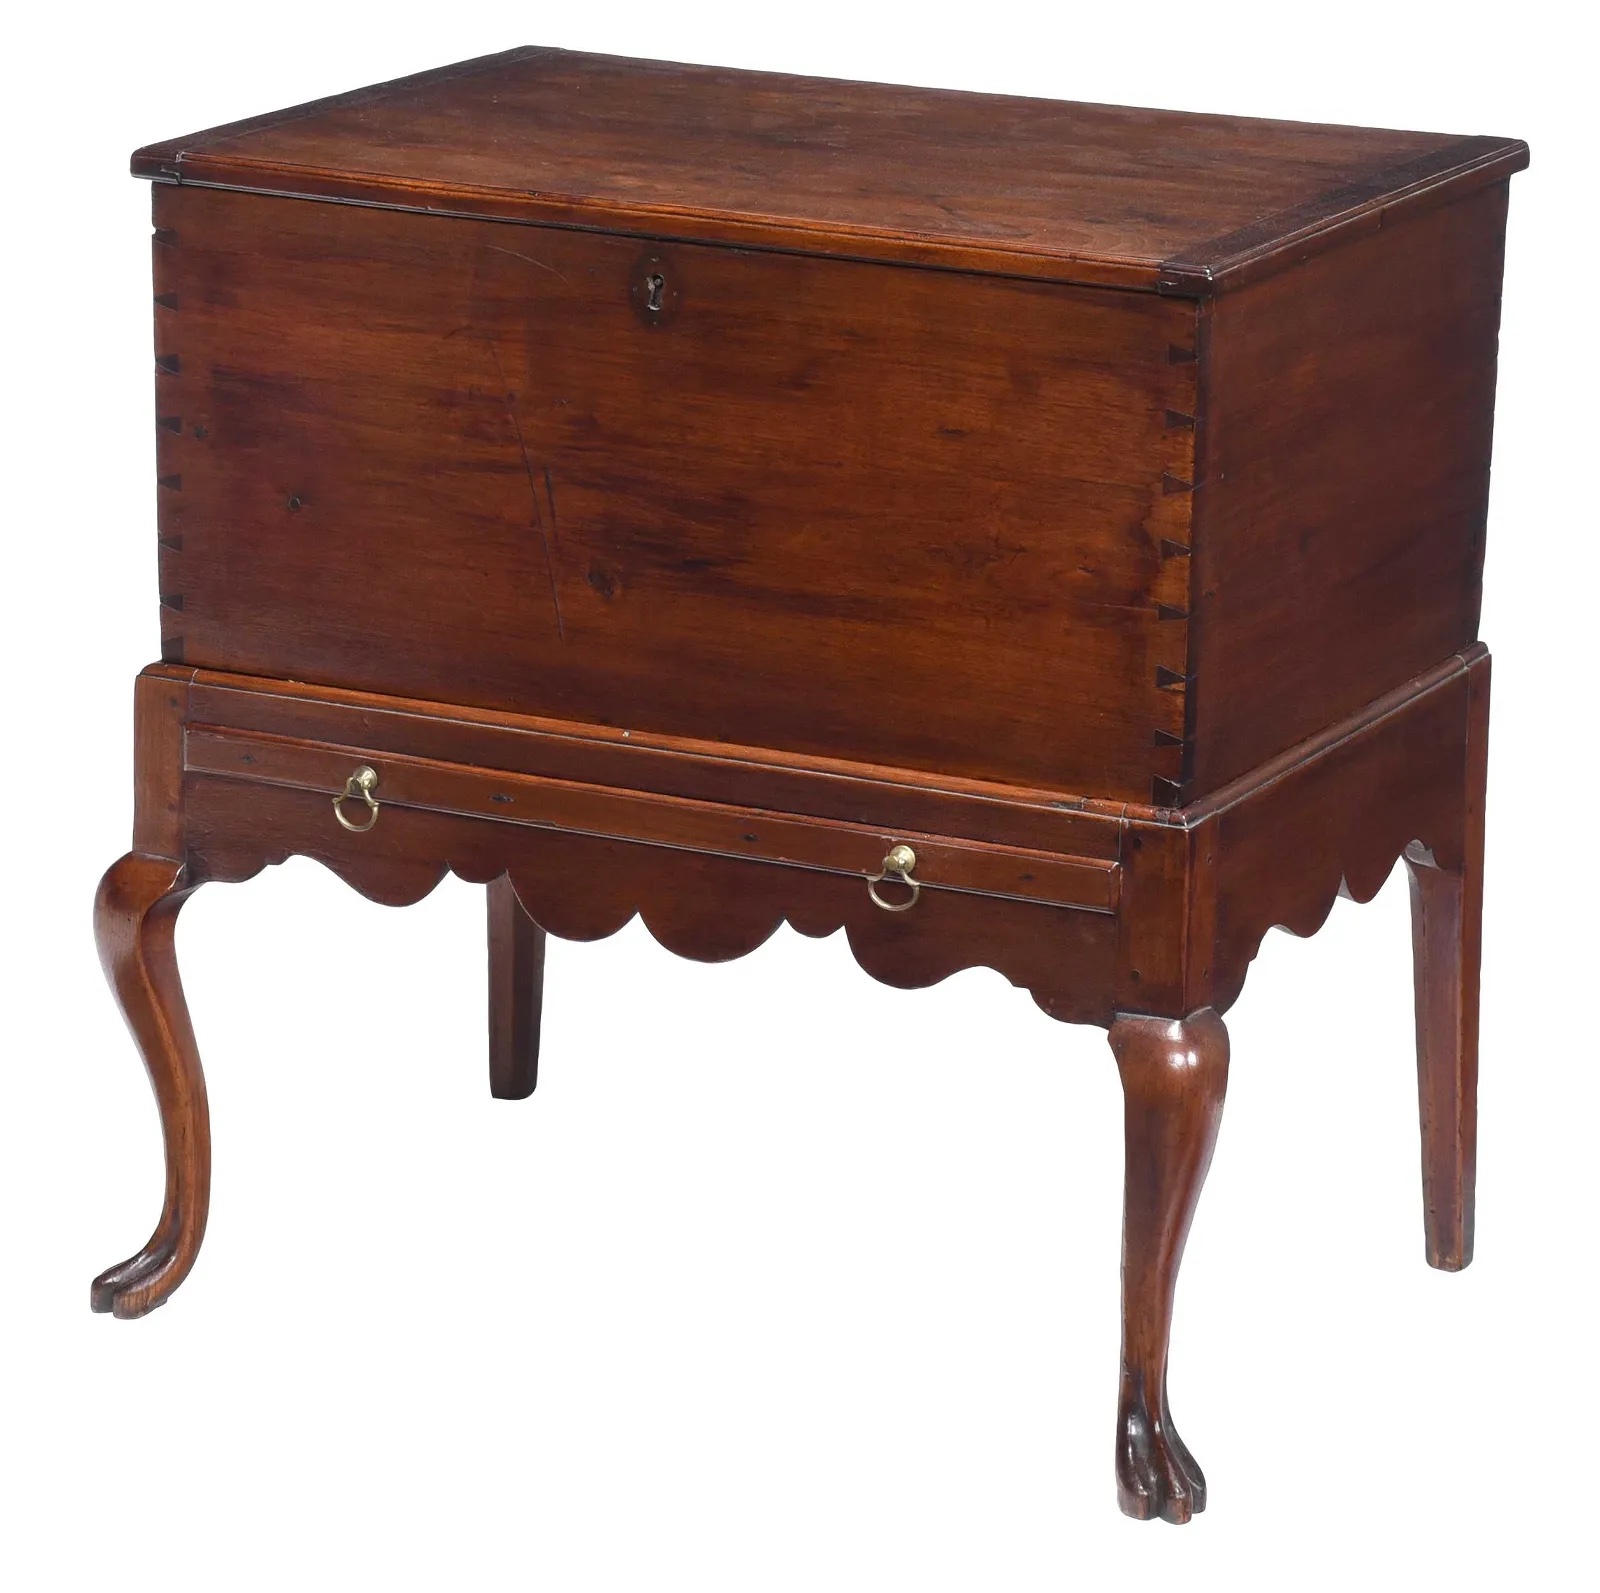 Brooklyn Museum deaccessions choice antique furniture, sending it to Brunk March 20